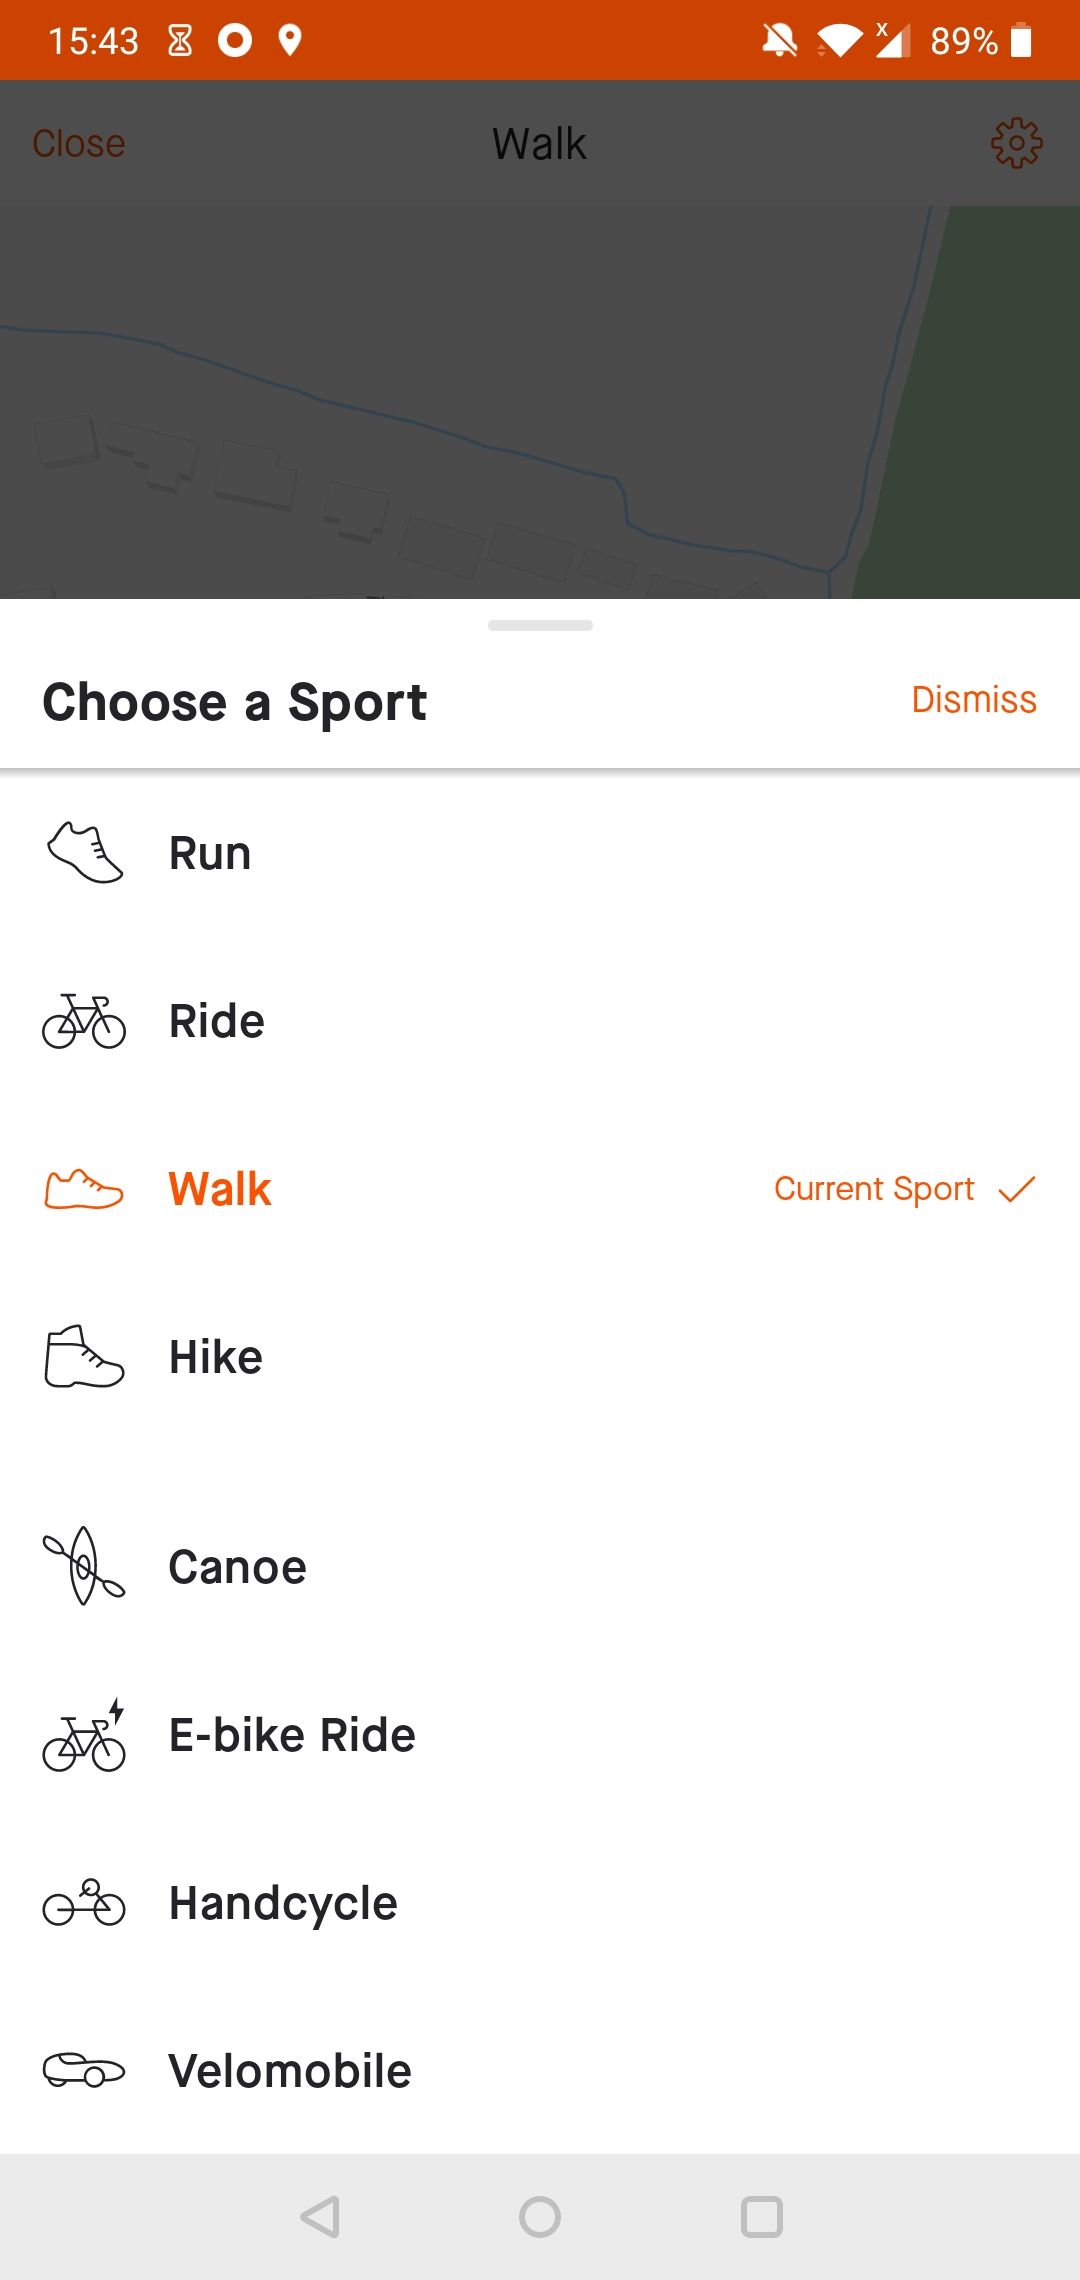 "Choose a Sport" section on the Strava Android app.